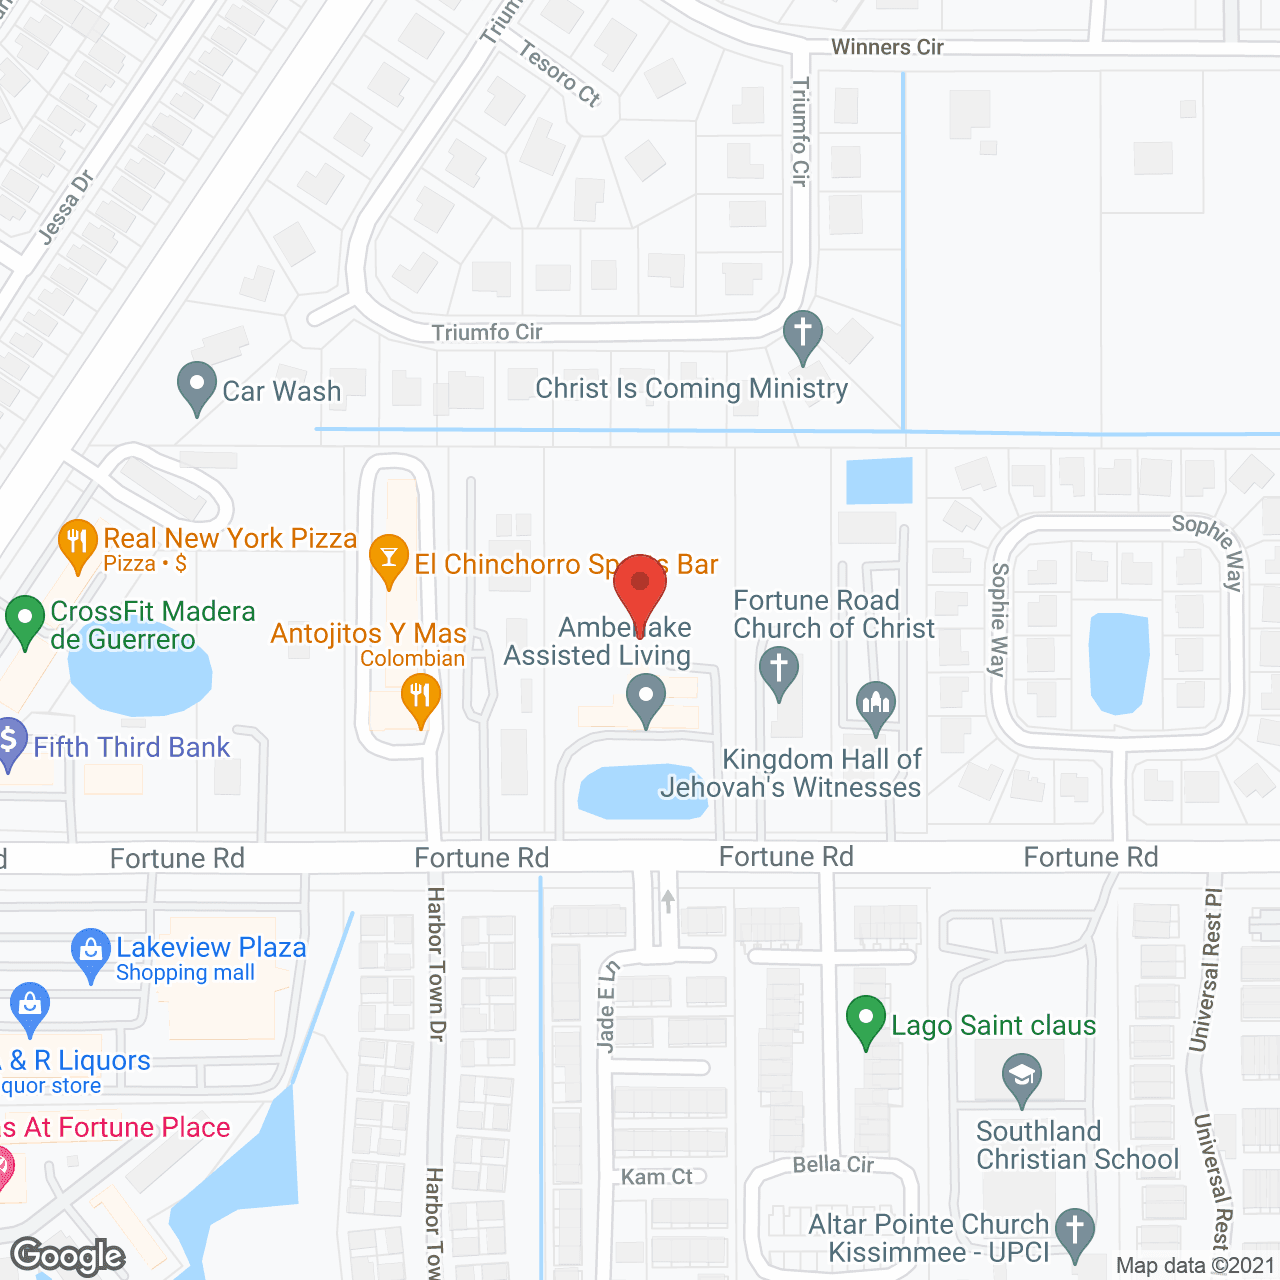 Amberlake Assisted Living in google map